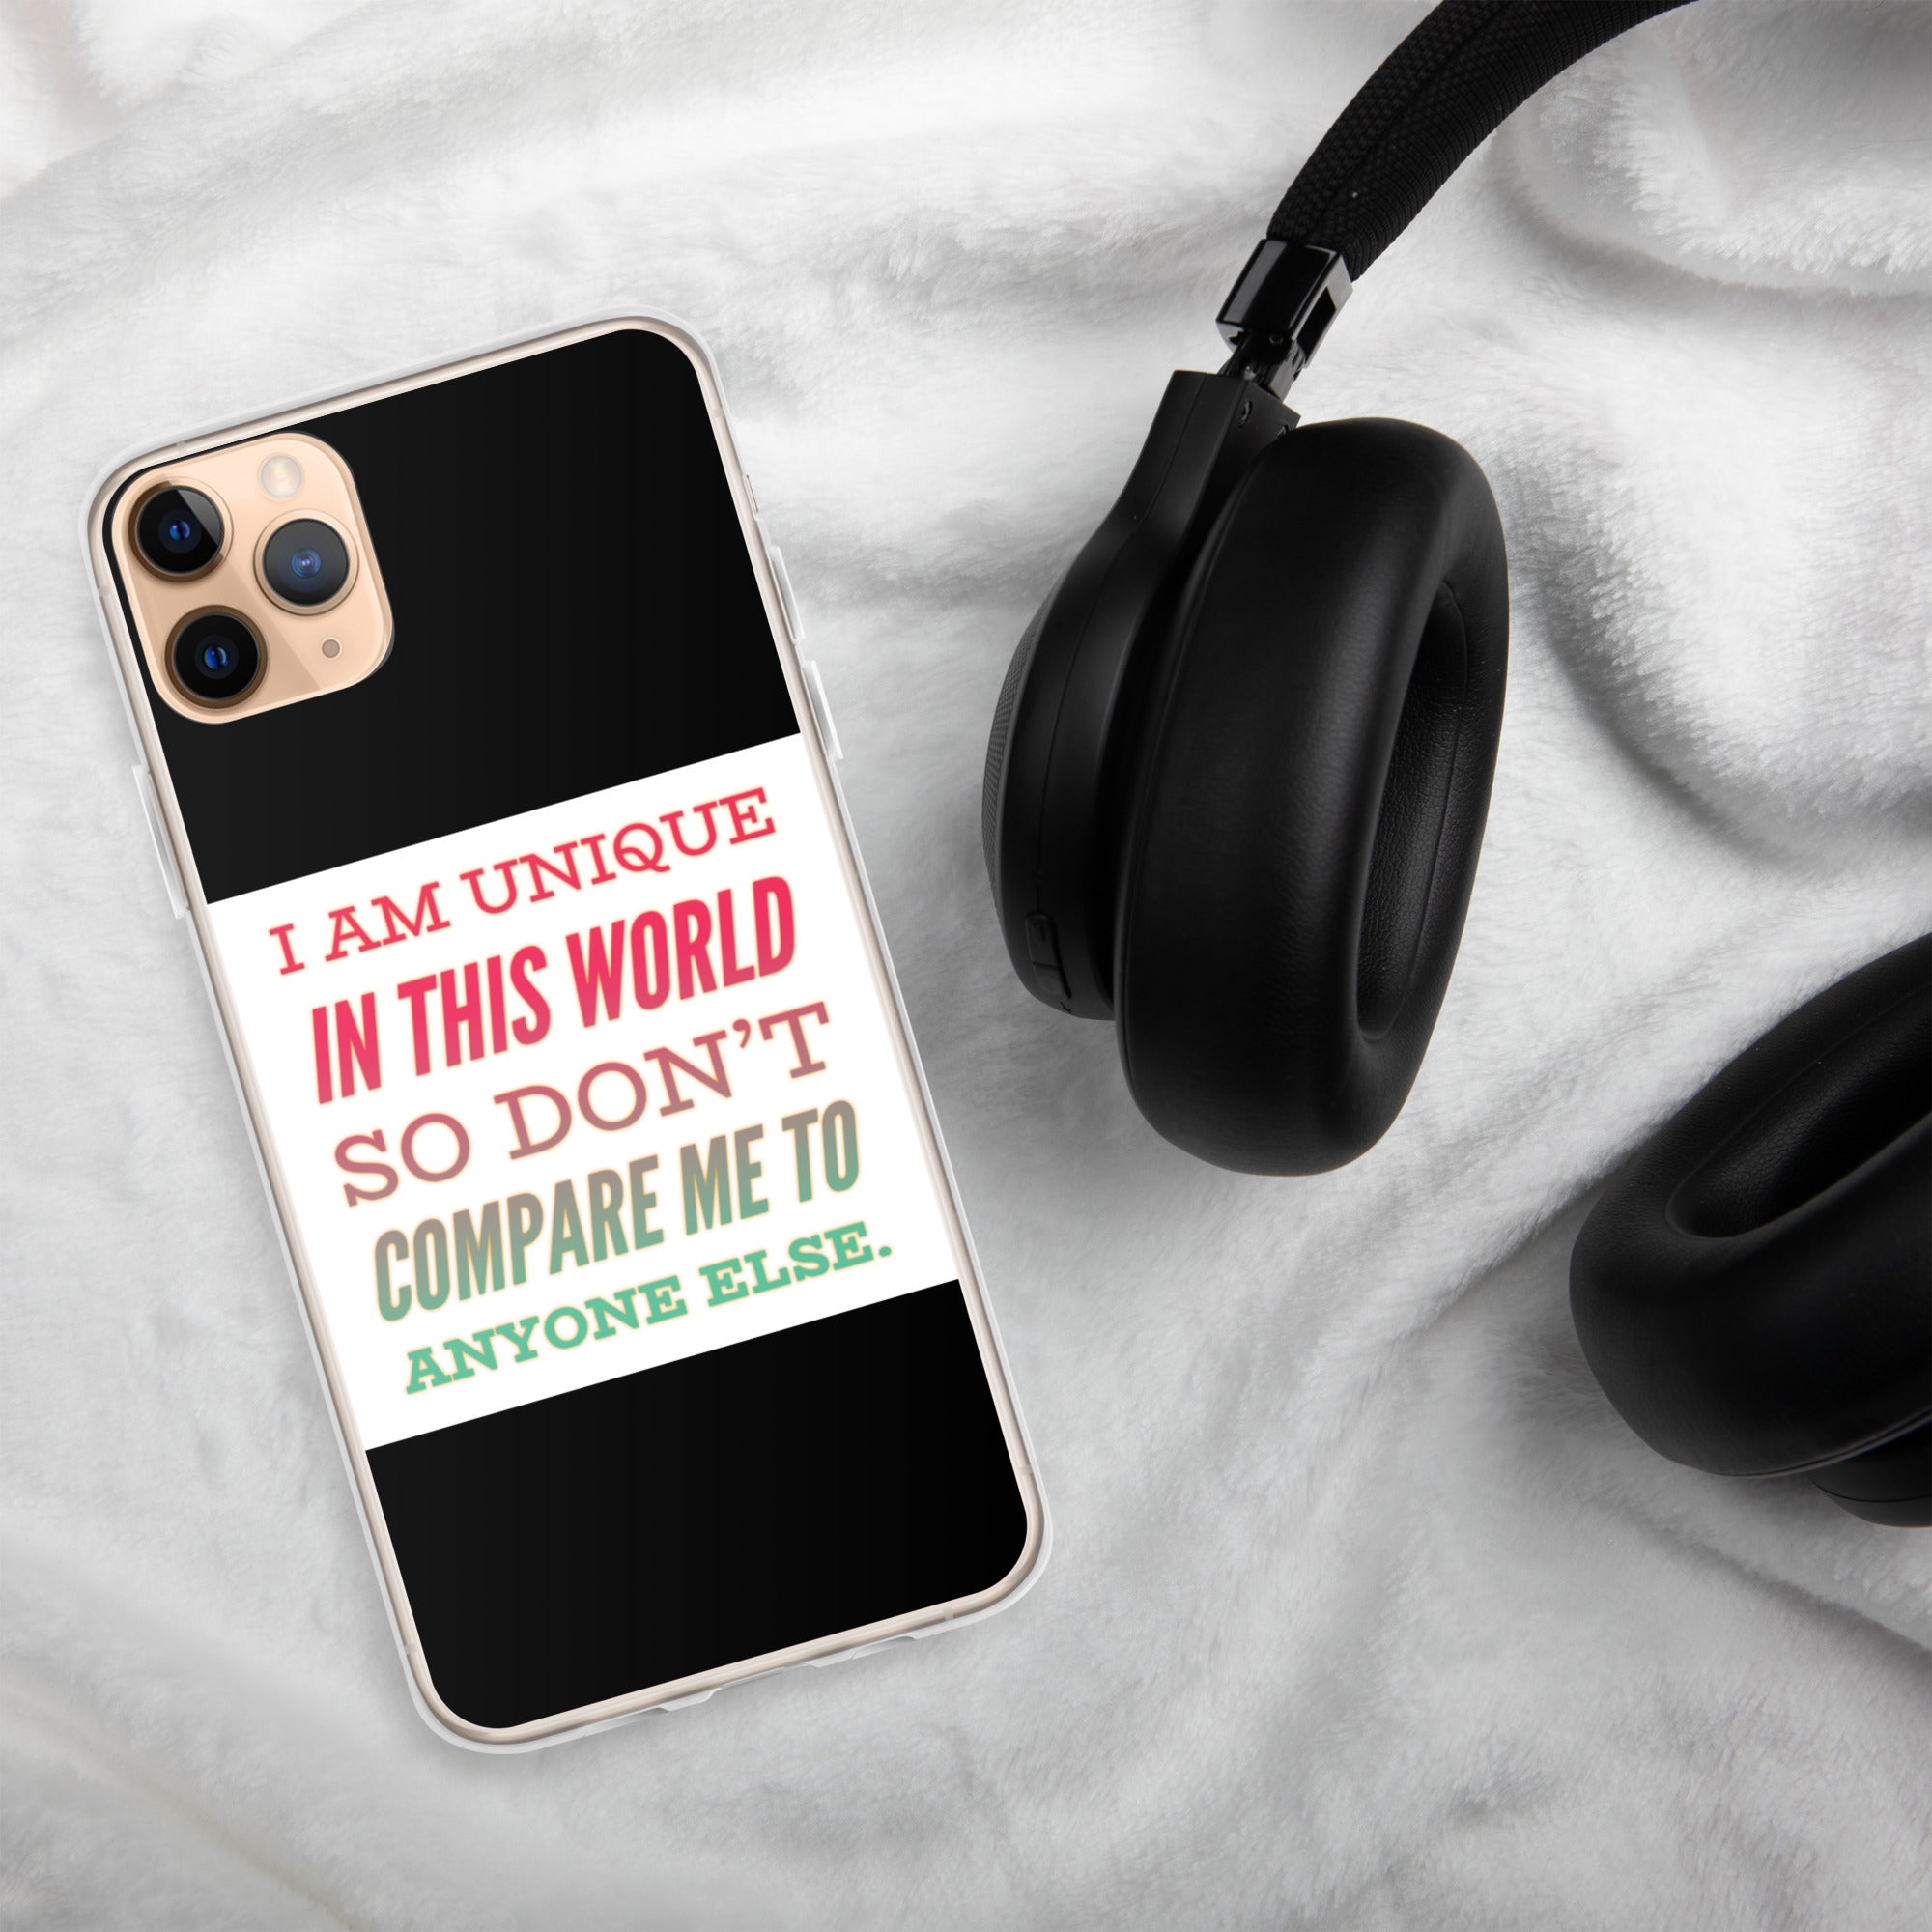 GloWell Designs - iPhone Case - Affirmation Quote - I Am Unique - GloWell Designs